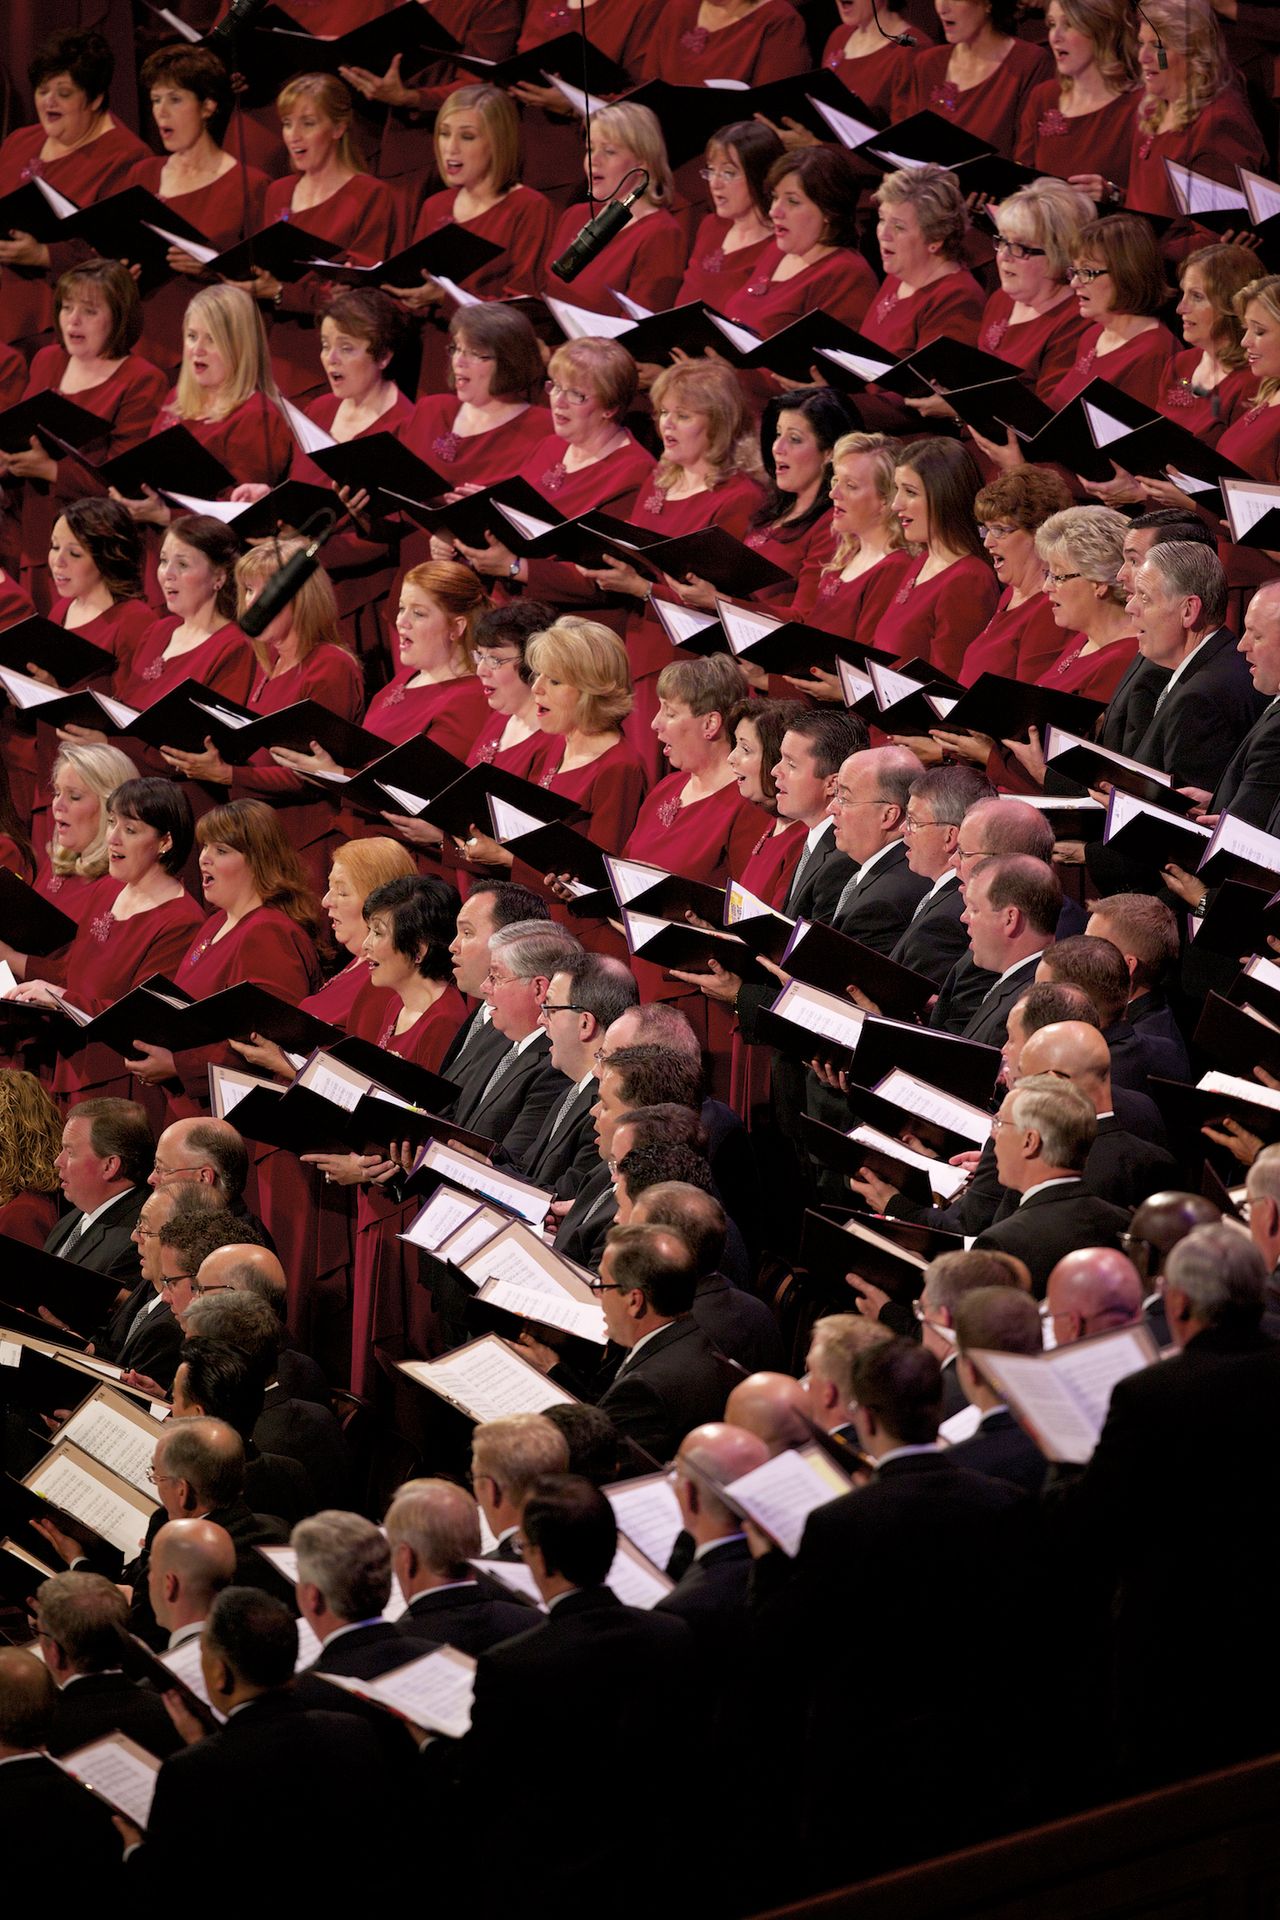 Men and women of the Mormon Tabernacle Choir singing together at the October 2013 general conference.